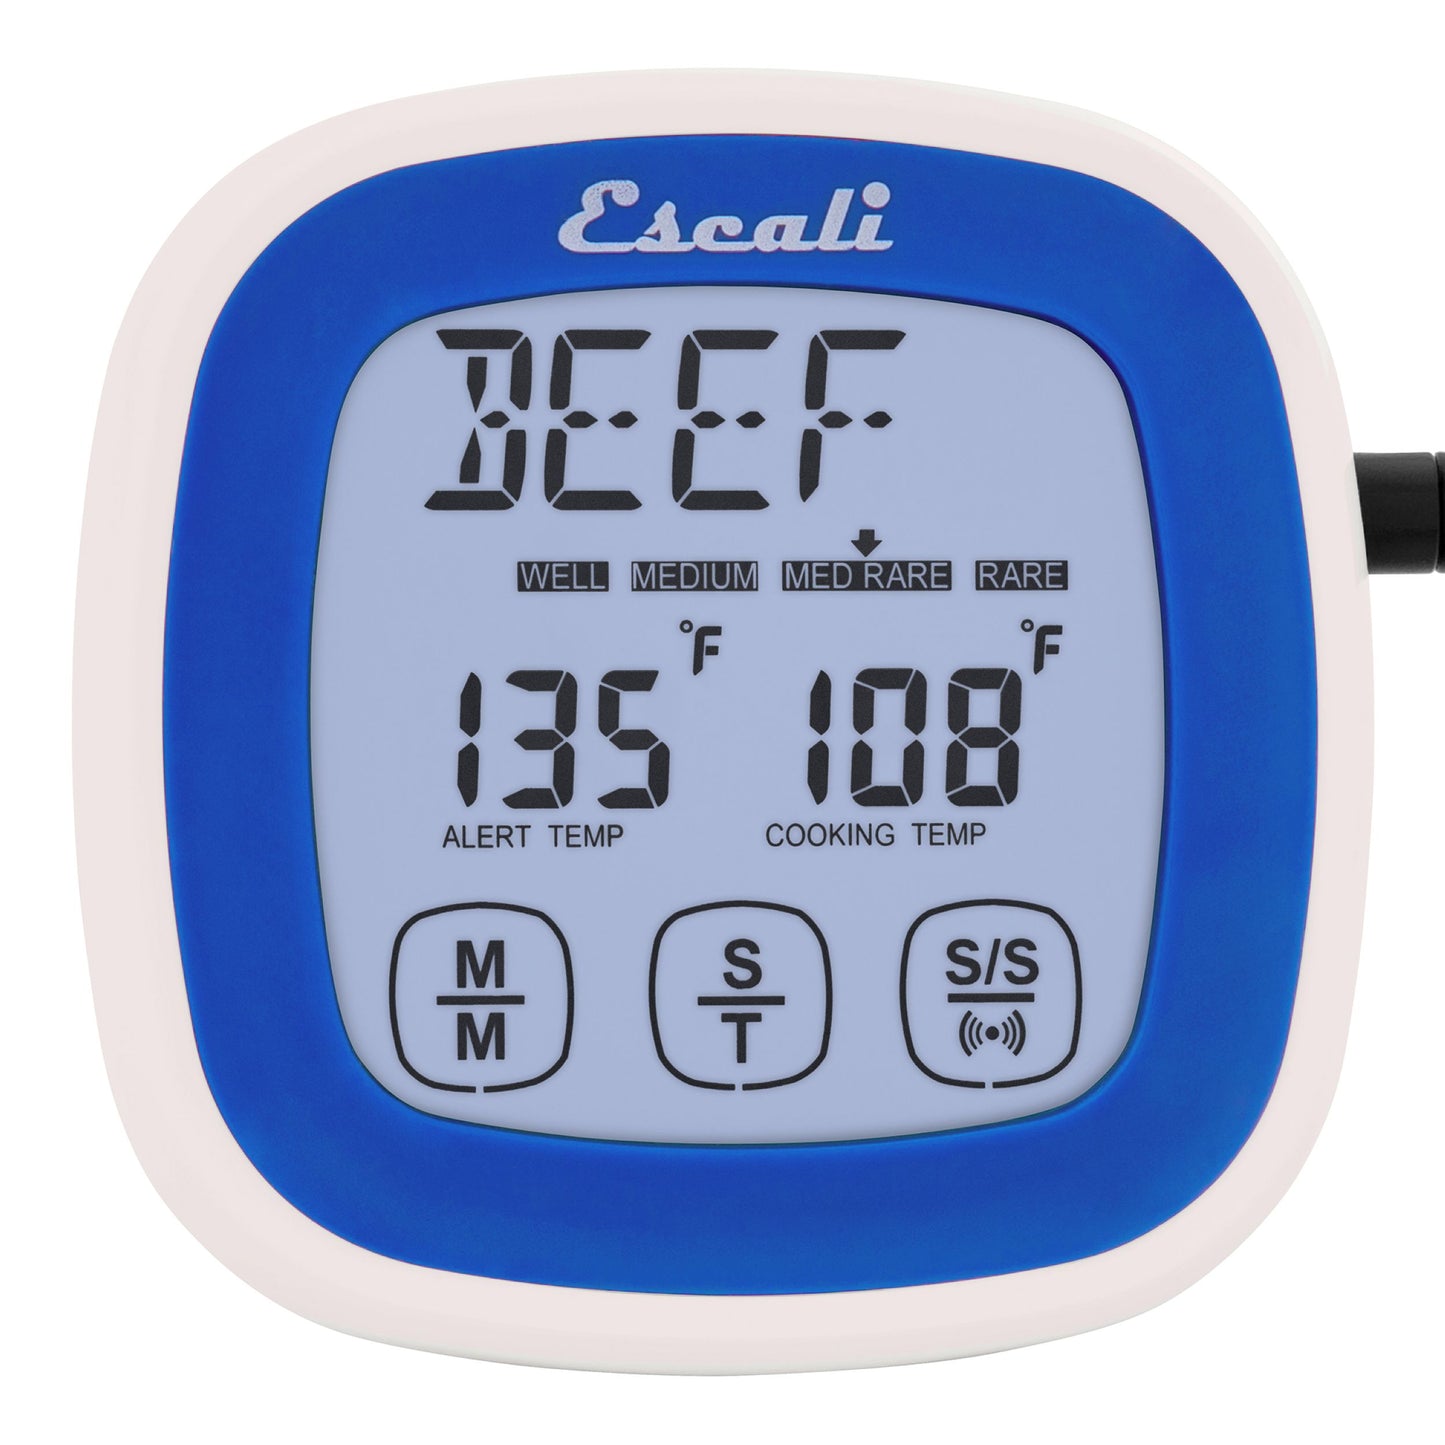 Touch Screen Thermometer & Timer